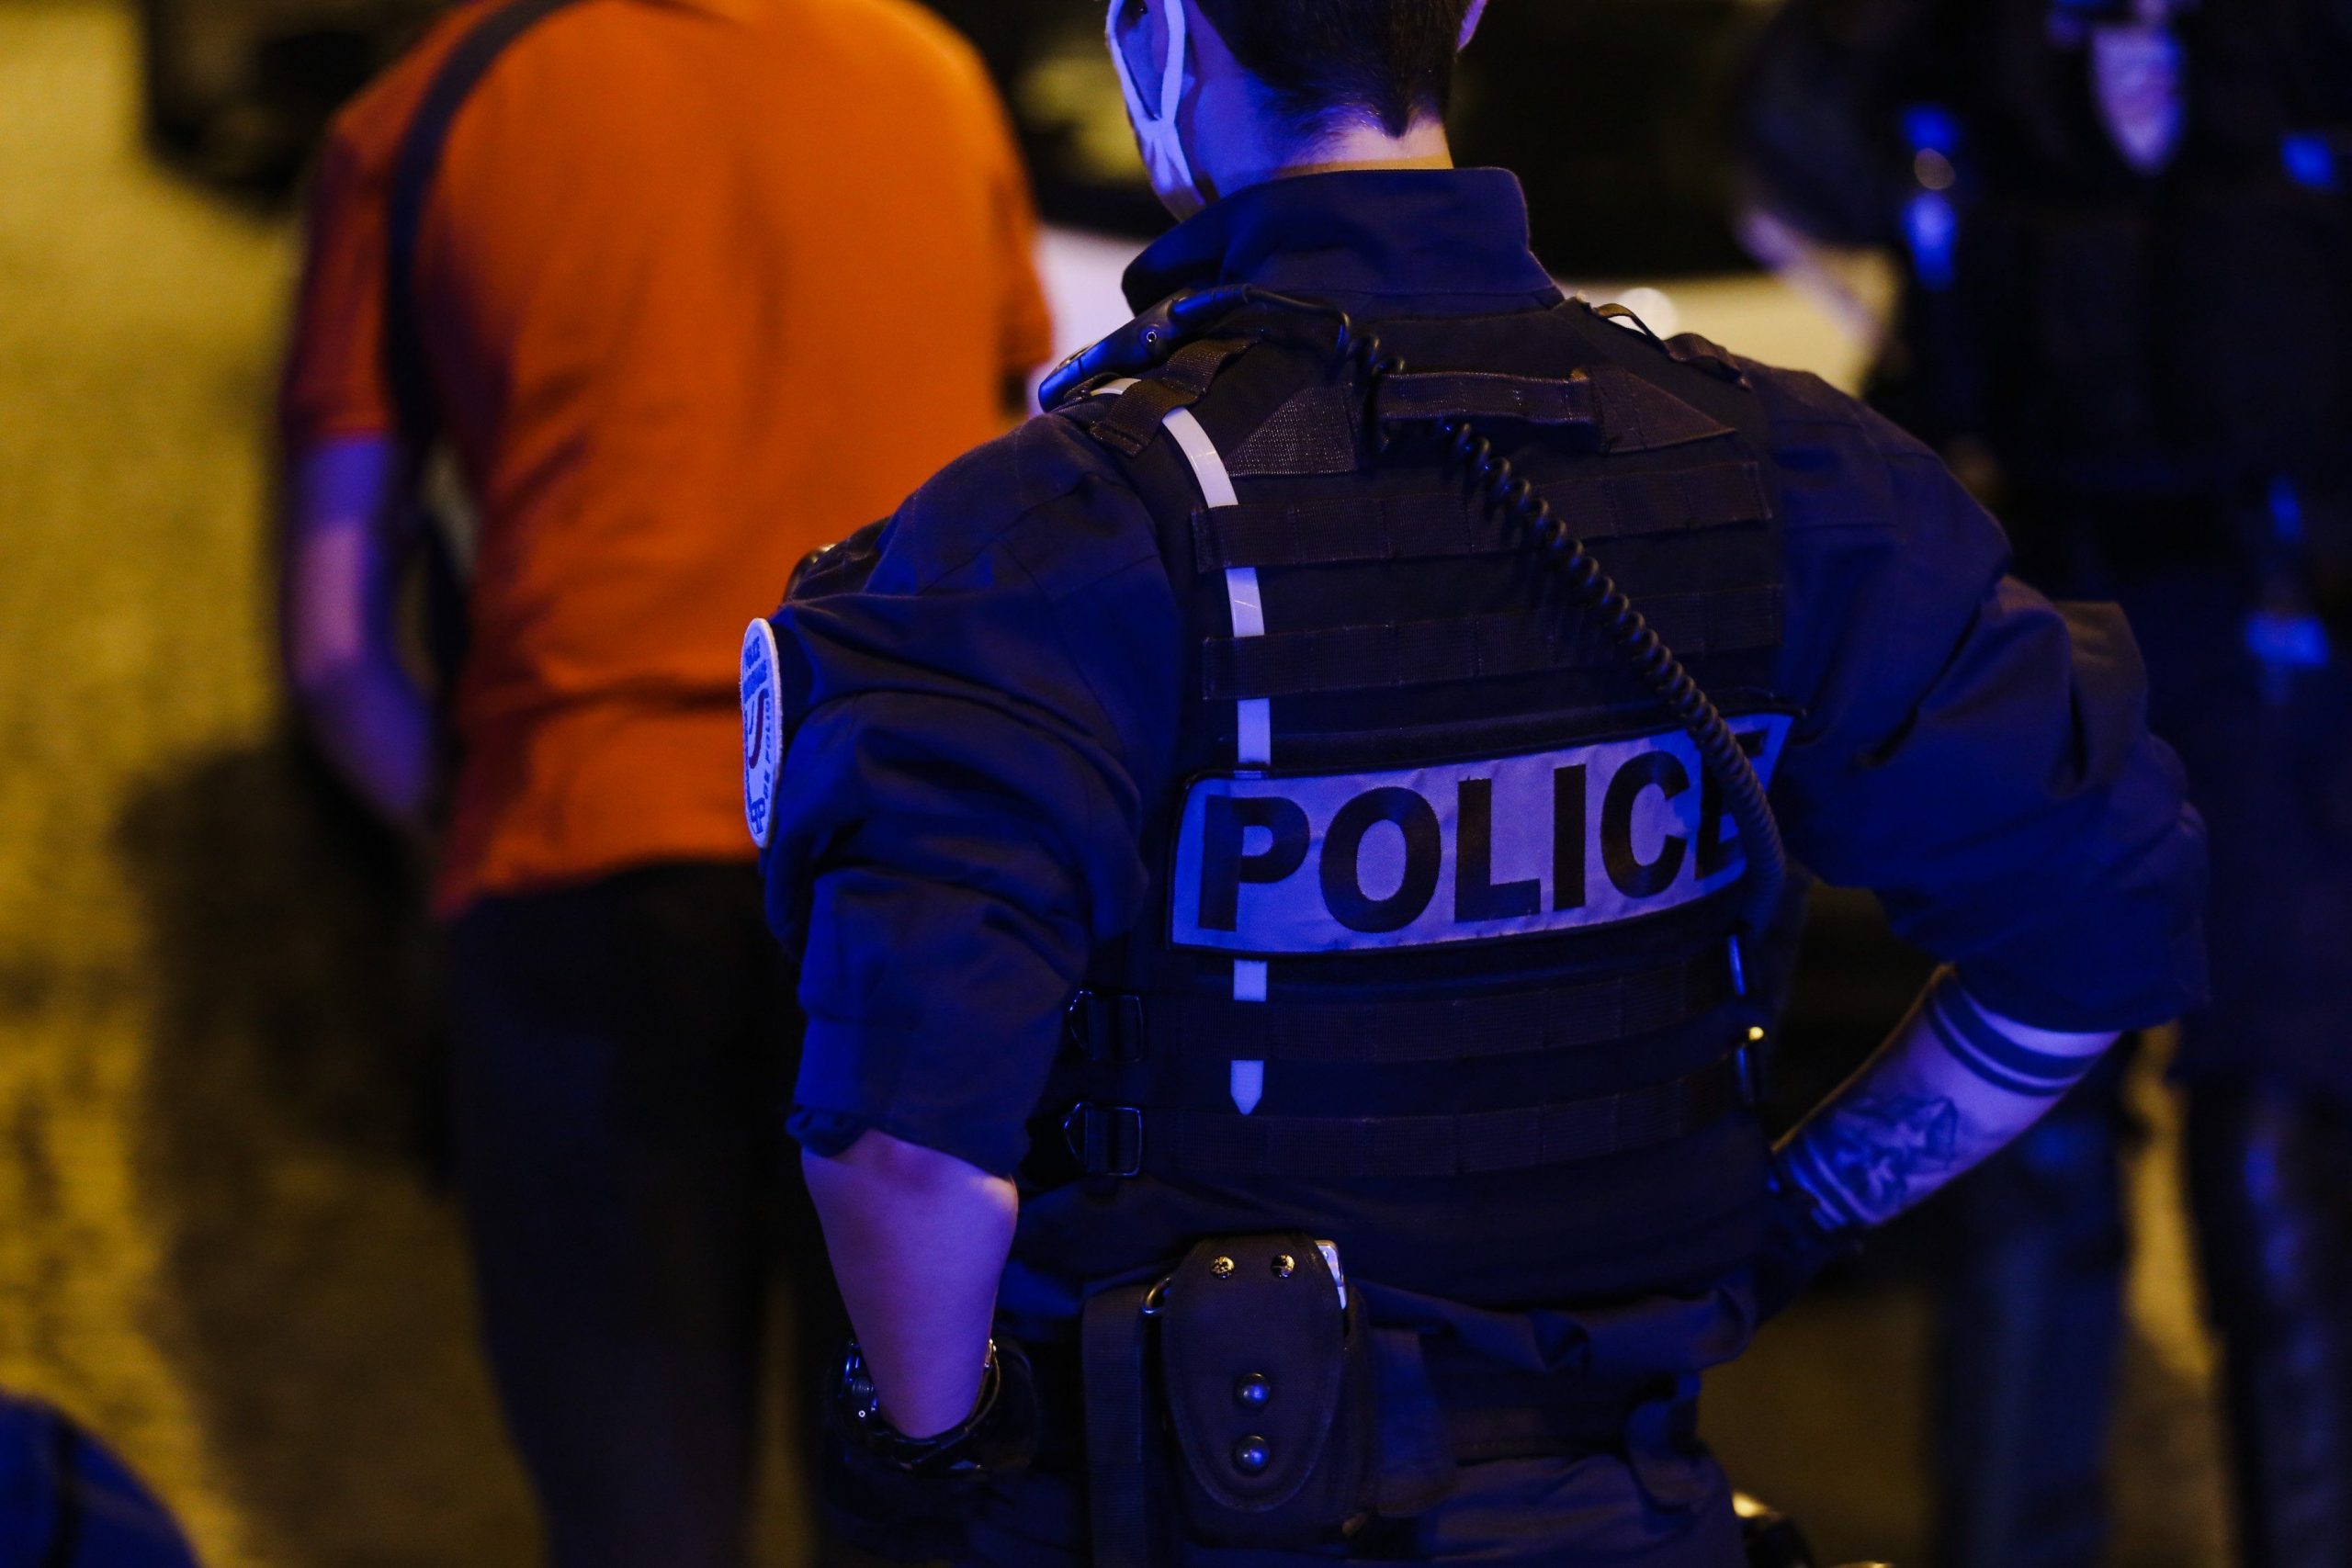 4 French police officials charged over killing, racial abuse of black man